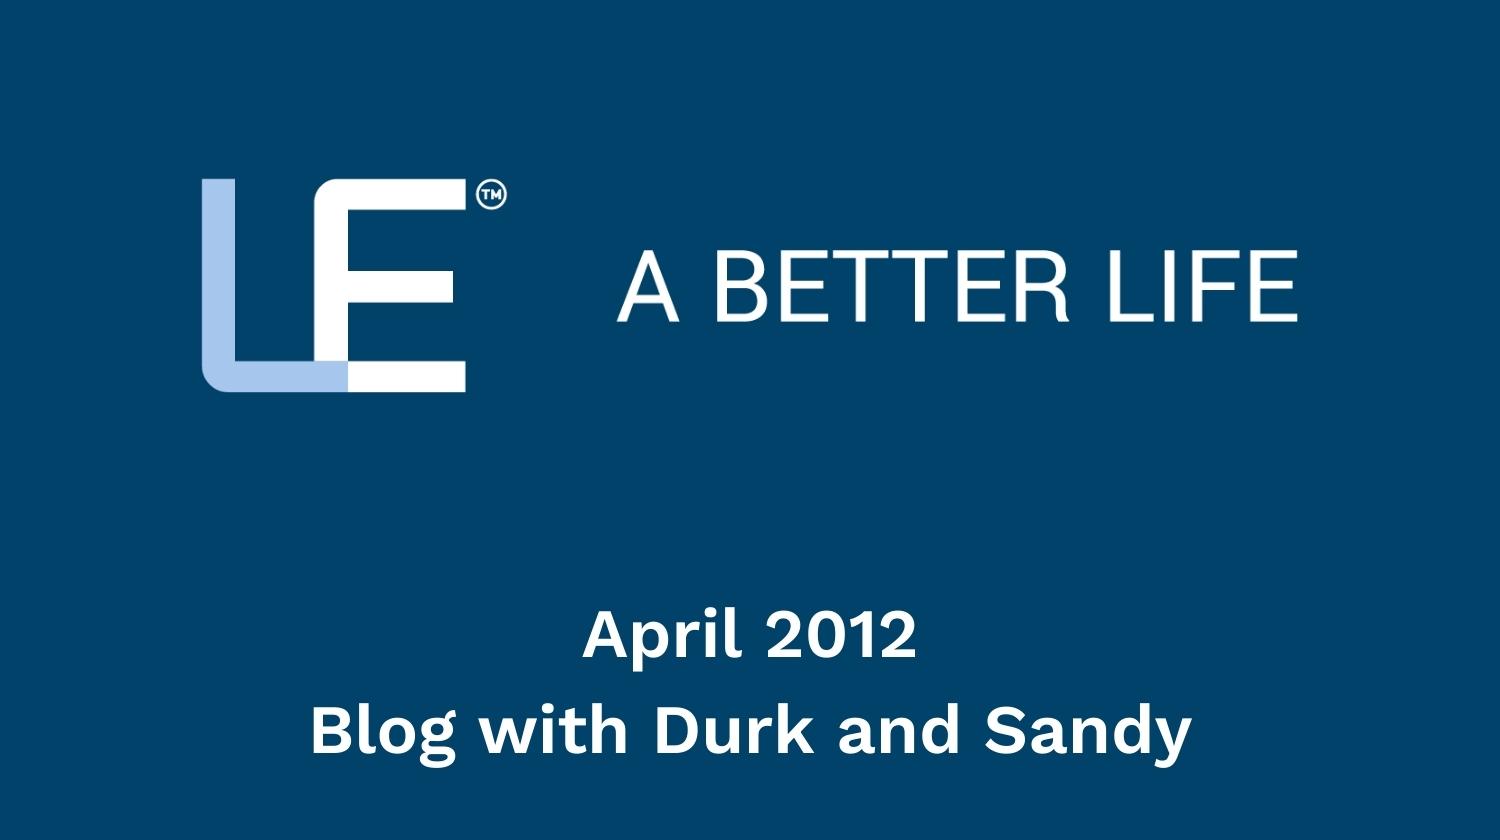 April 2012 Blog with Durk and Sandy